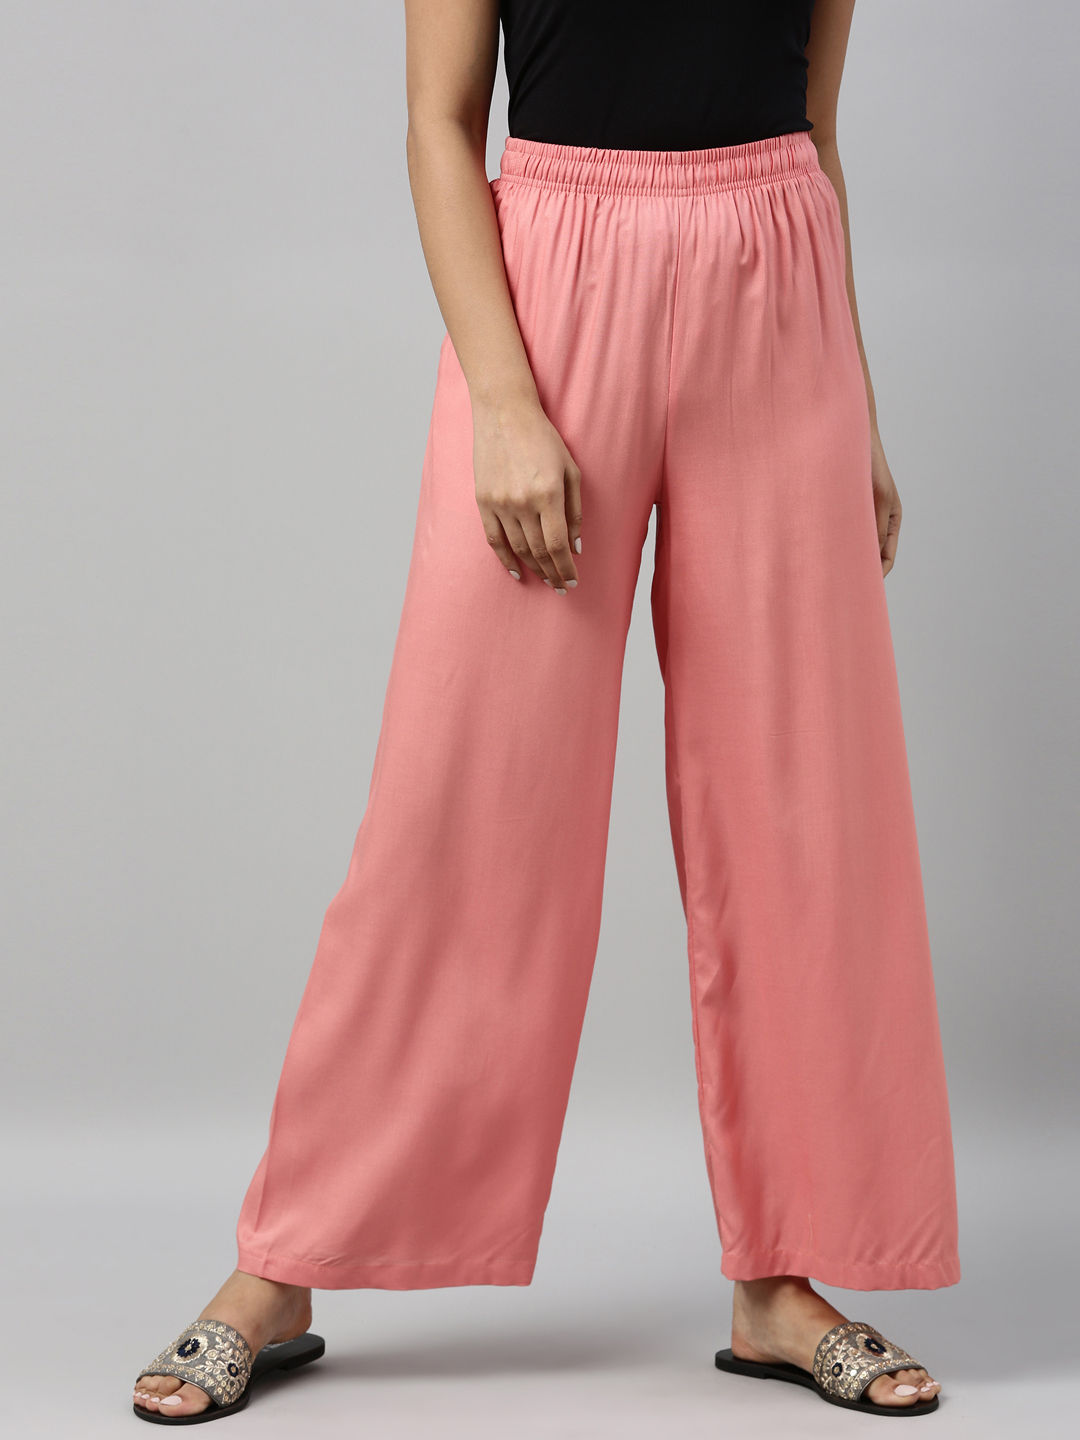 Go Colors Women Peach Solid Viscose Knit Mid Rise Palazzos  Peach Buy Go  Colors Women Peach Solid Viscose Knit Mid Rise Palazzos  Peach Online at  Best Price in India  Nykaa